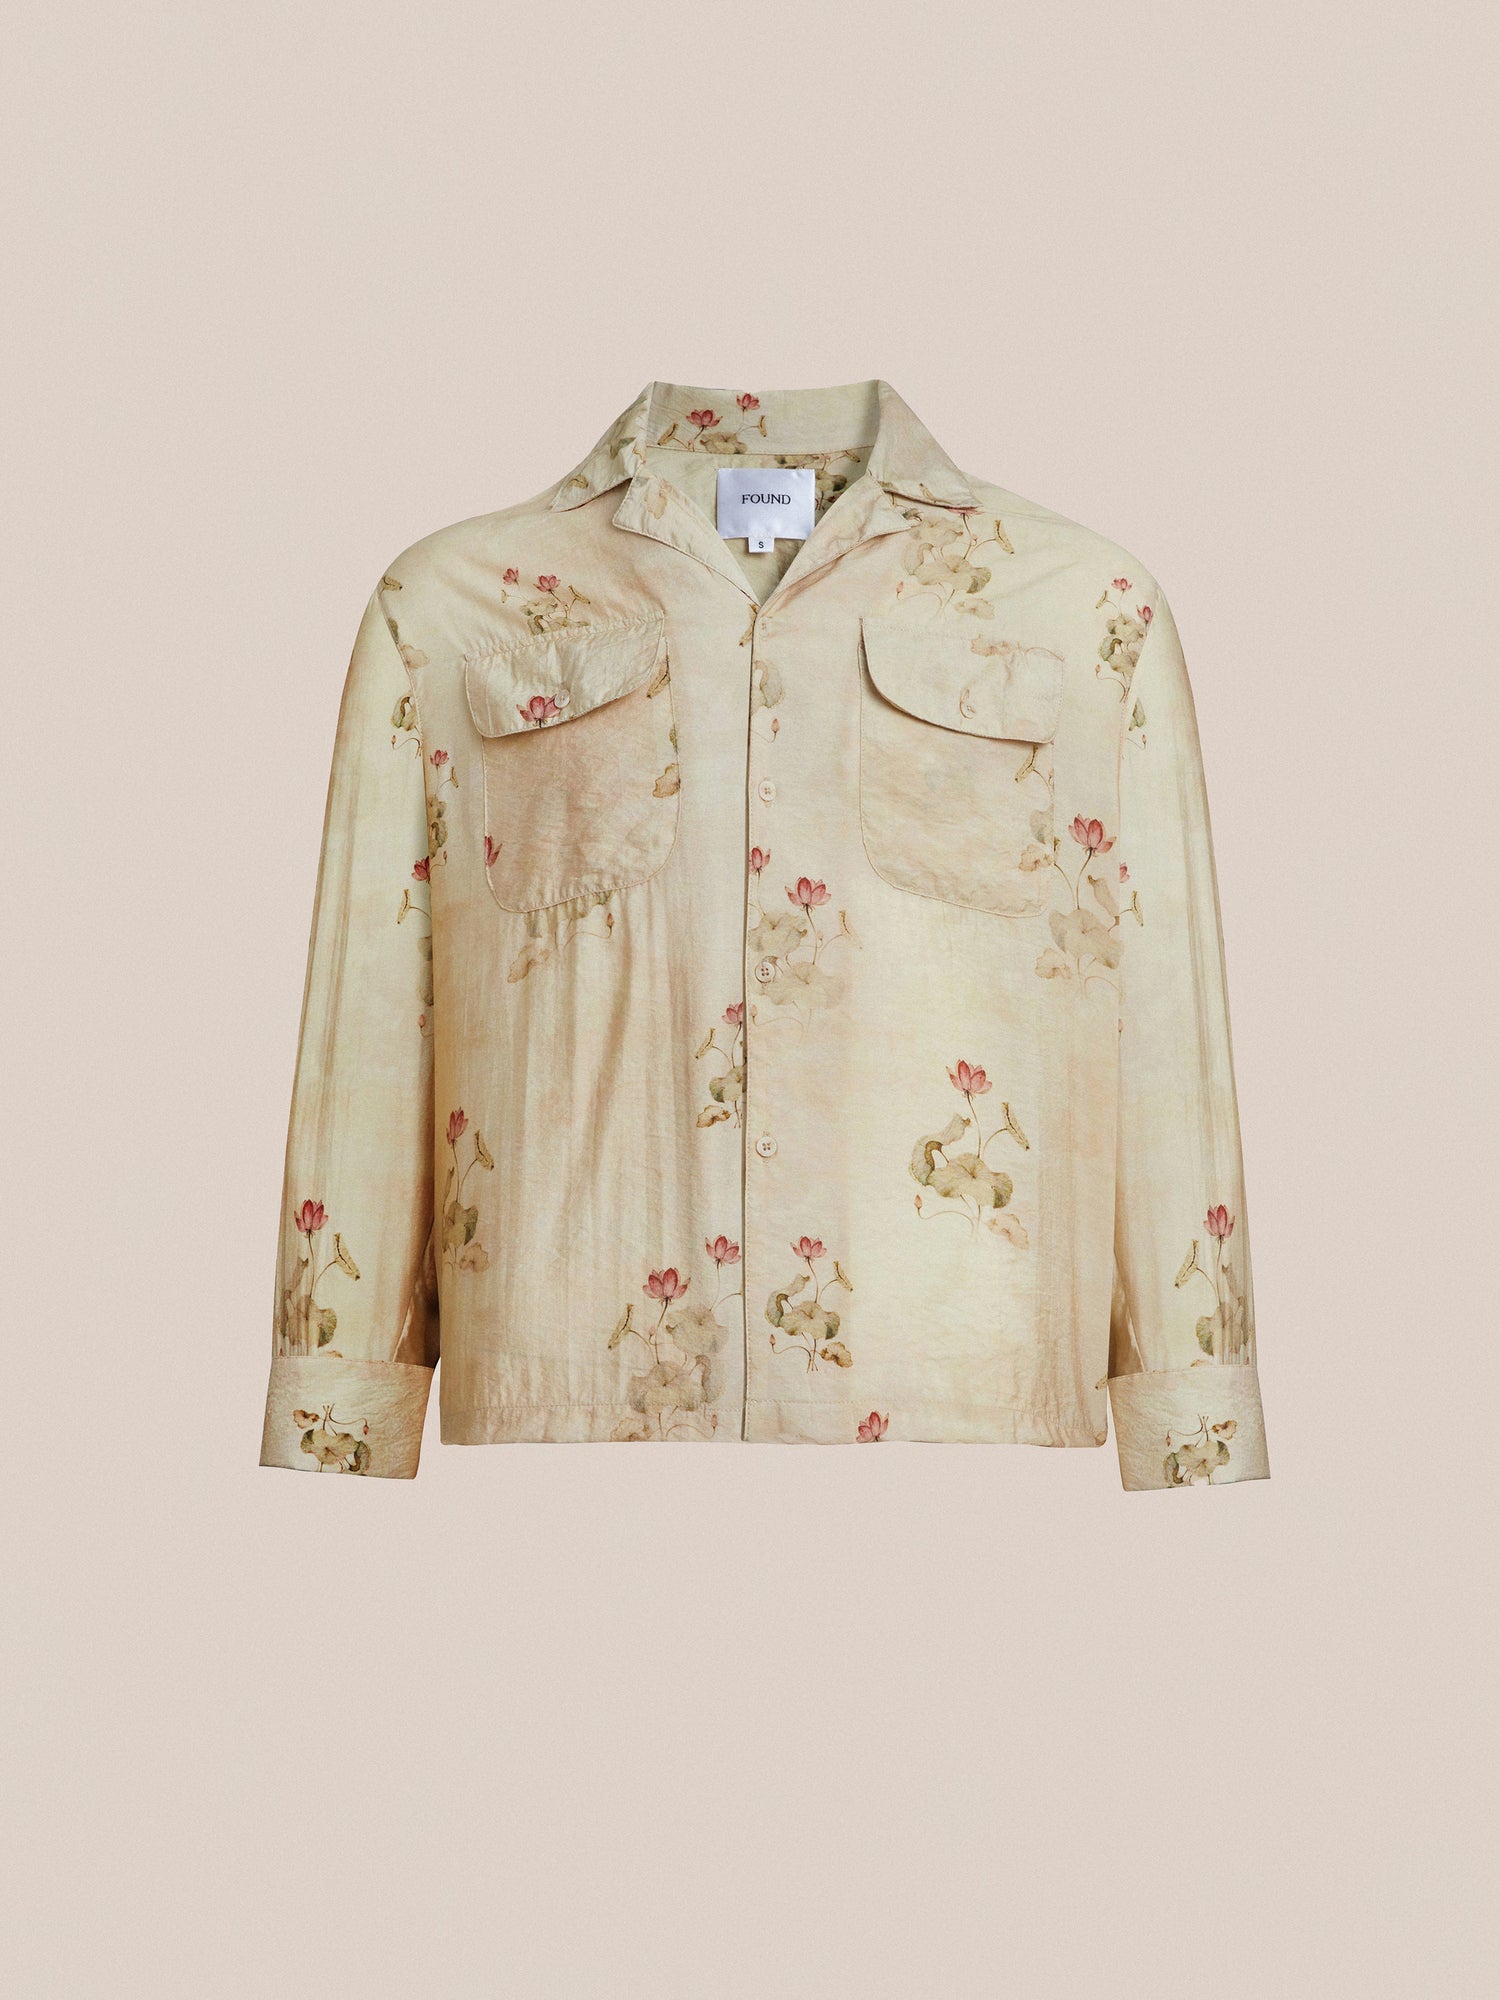 A classic appeal Lotus LS Camp Shirt with a floral print on it by Found.